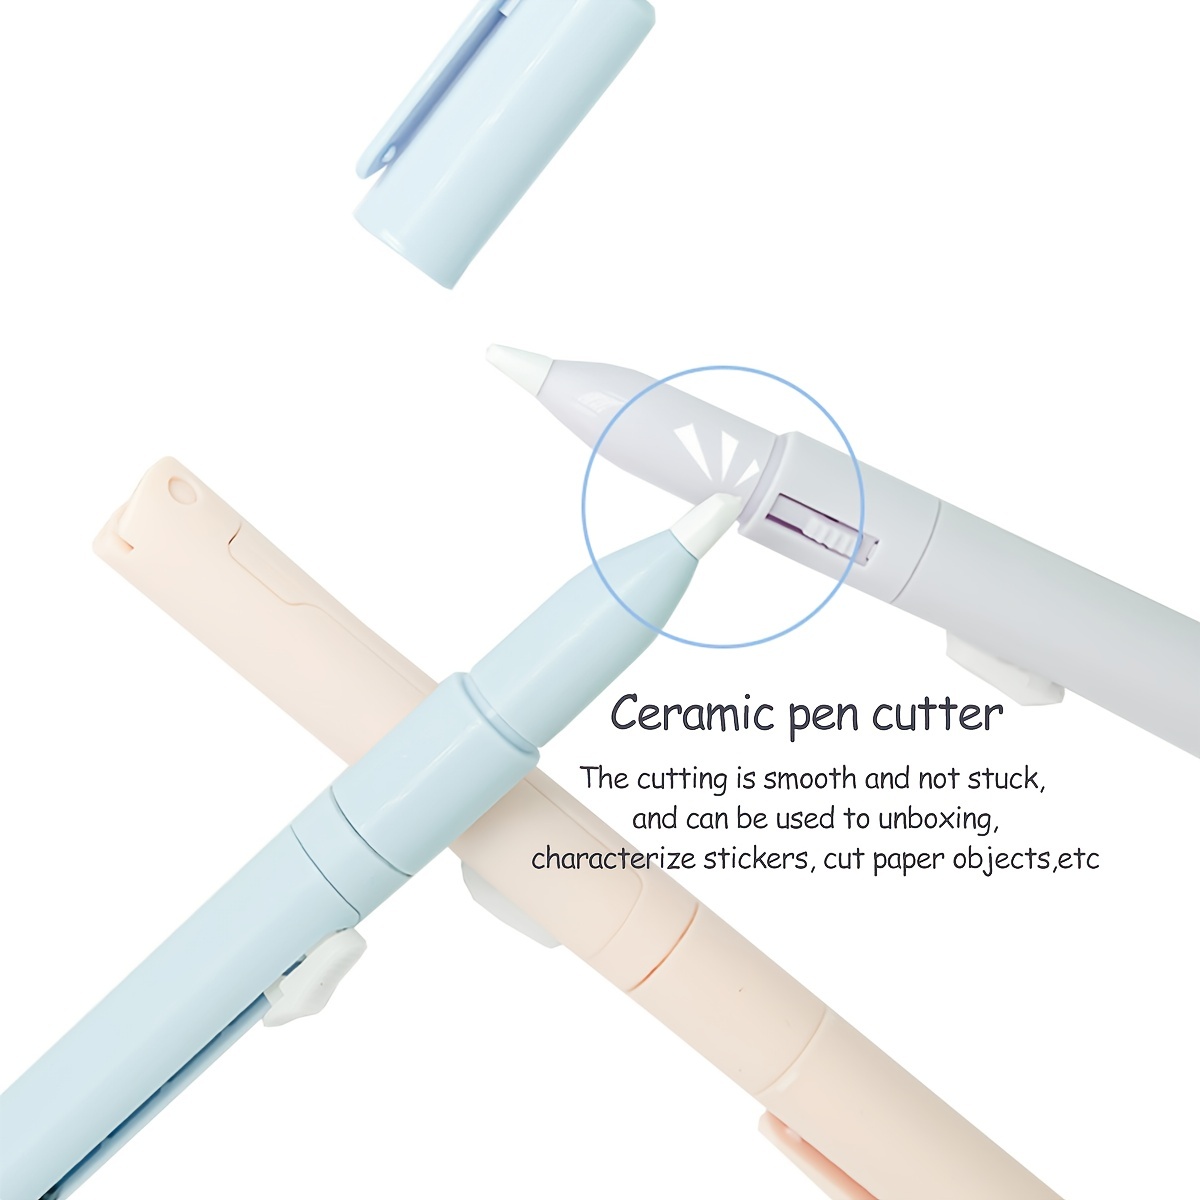 Ceramic Pen Cutter (which actually Cuts Paper :-)) was a Game